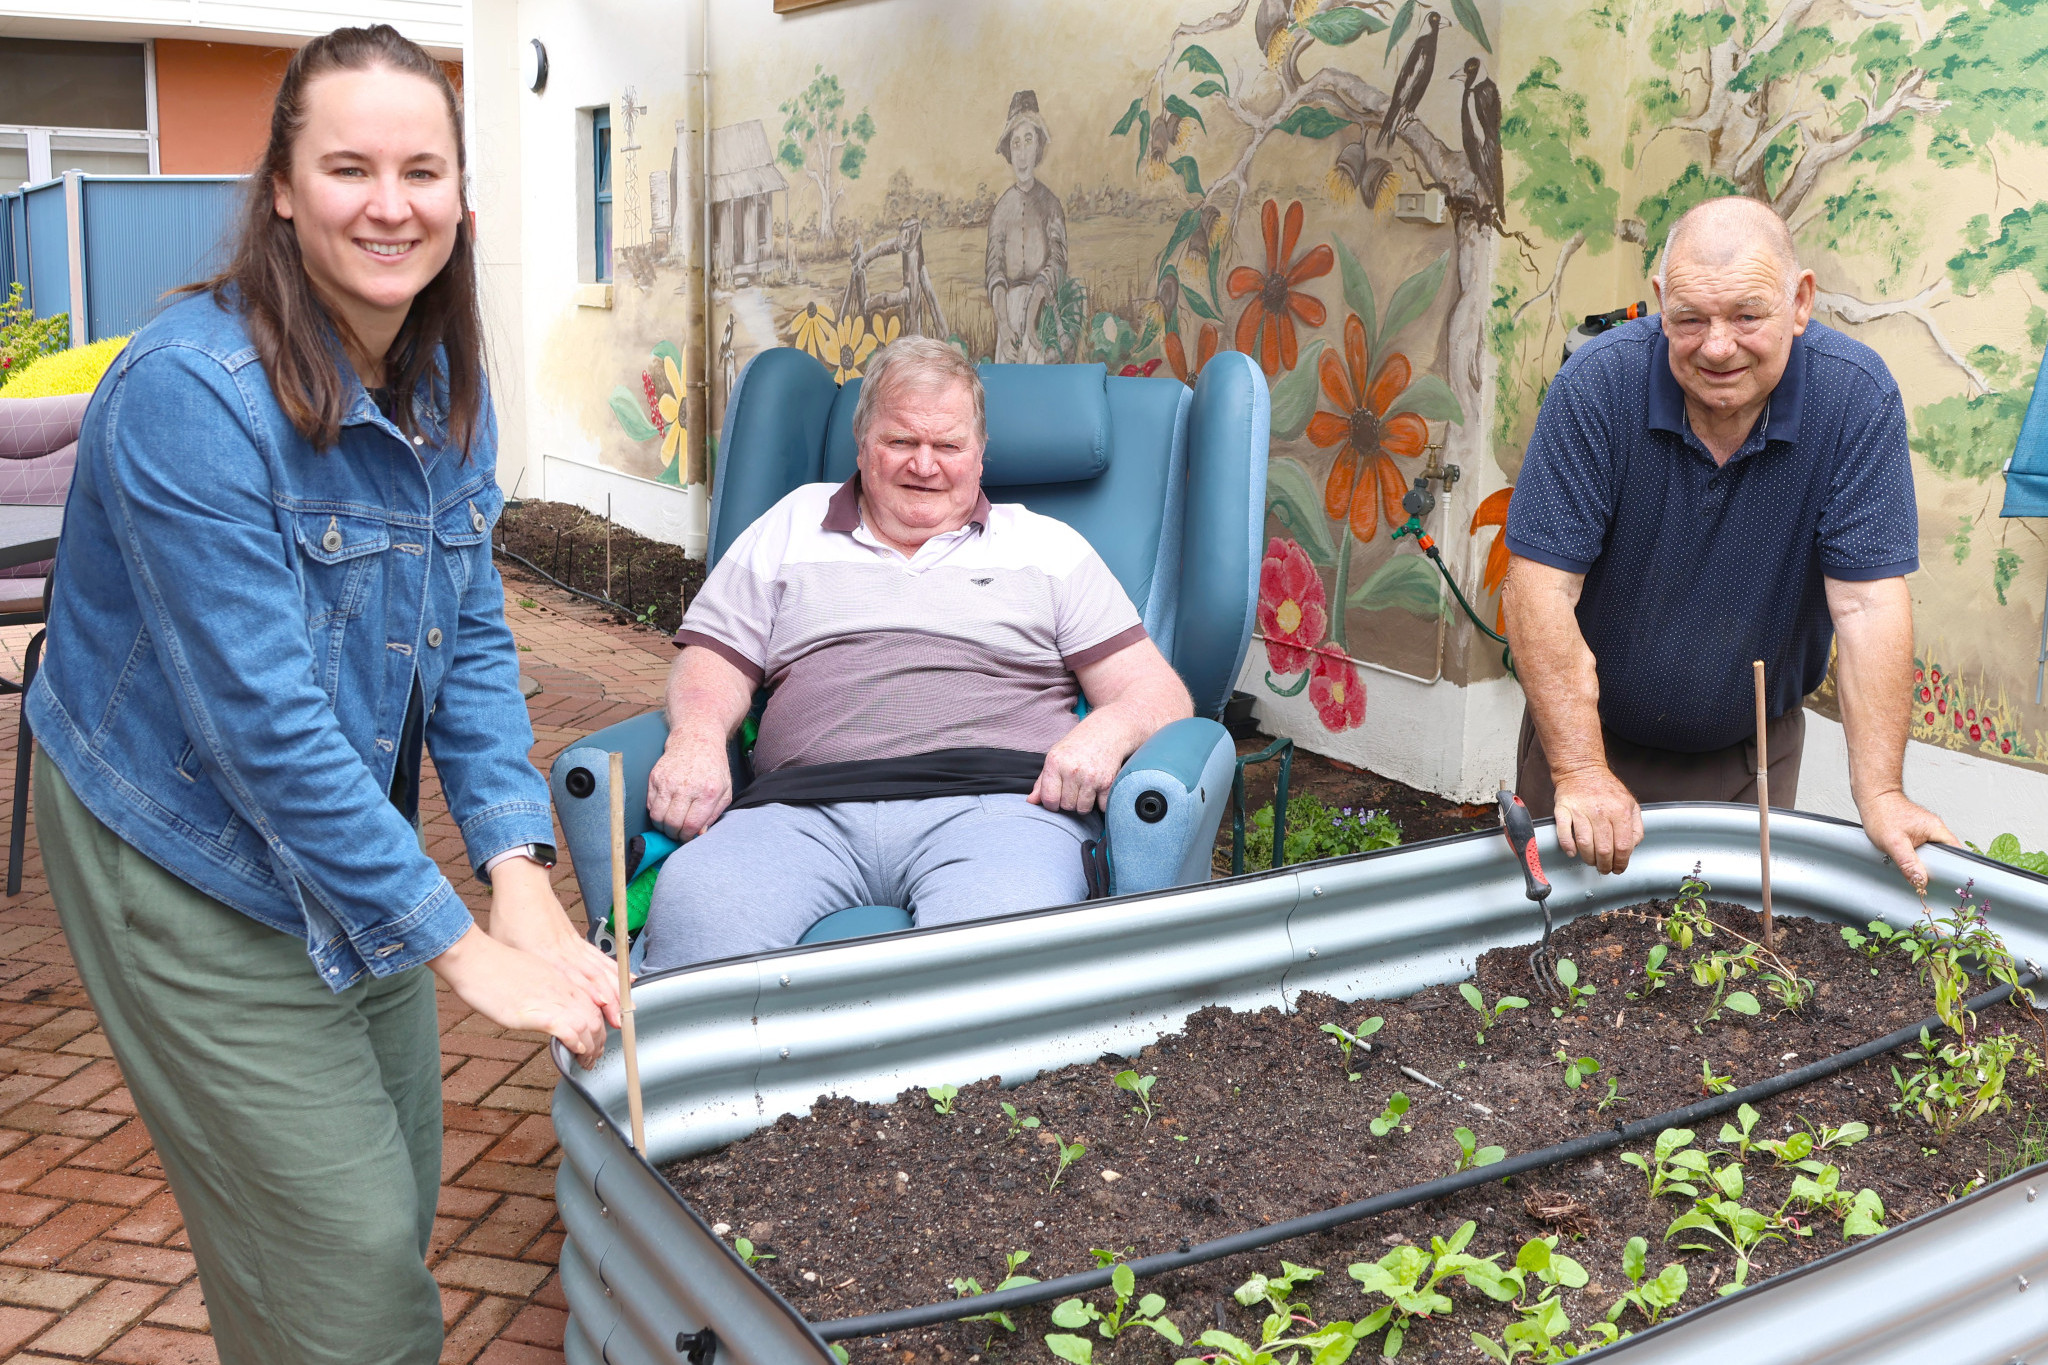 Dimboola Meaningful Life coordinator Megan Naylor with residents Graeme and the late David in a section of the Bretag garden.